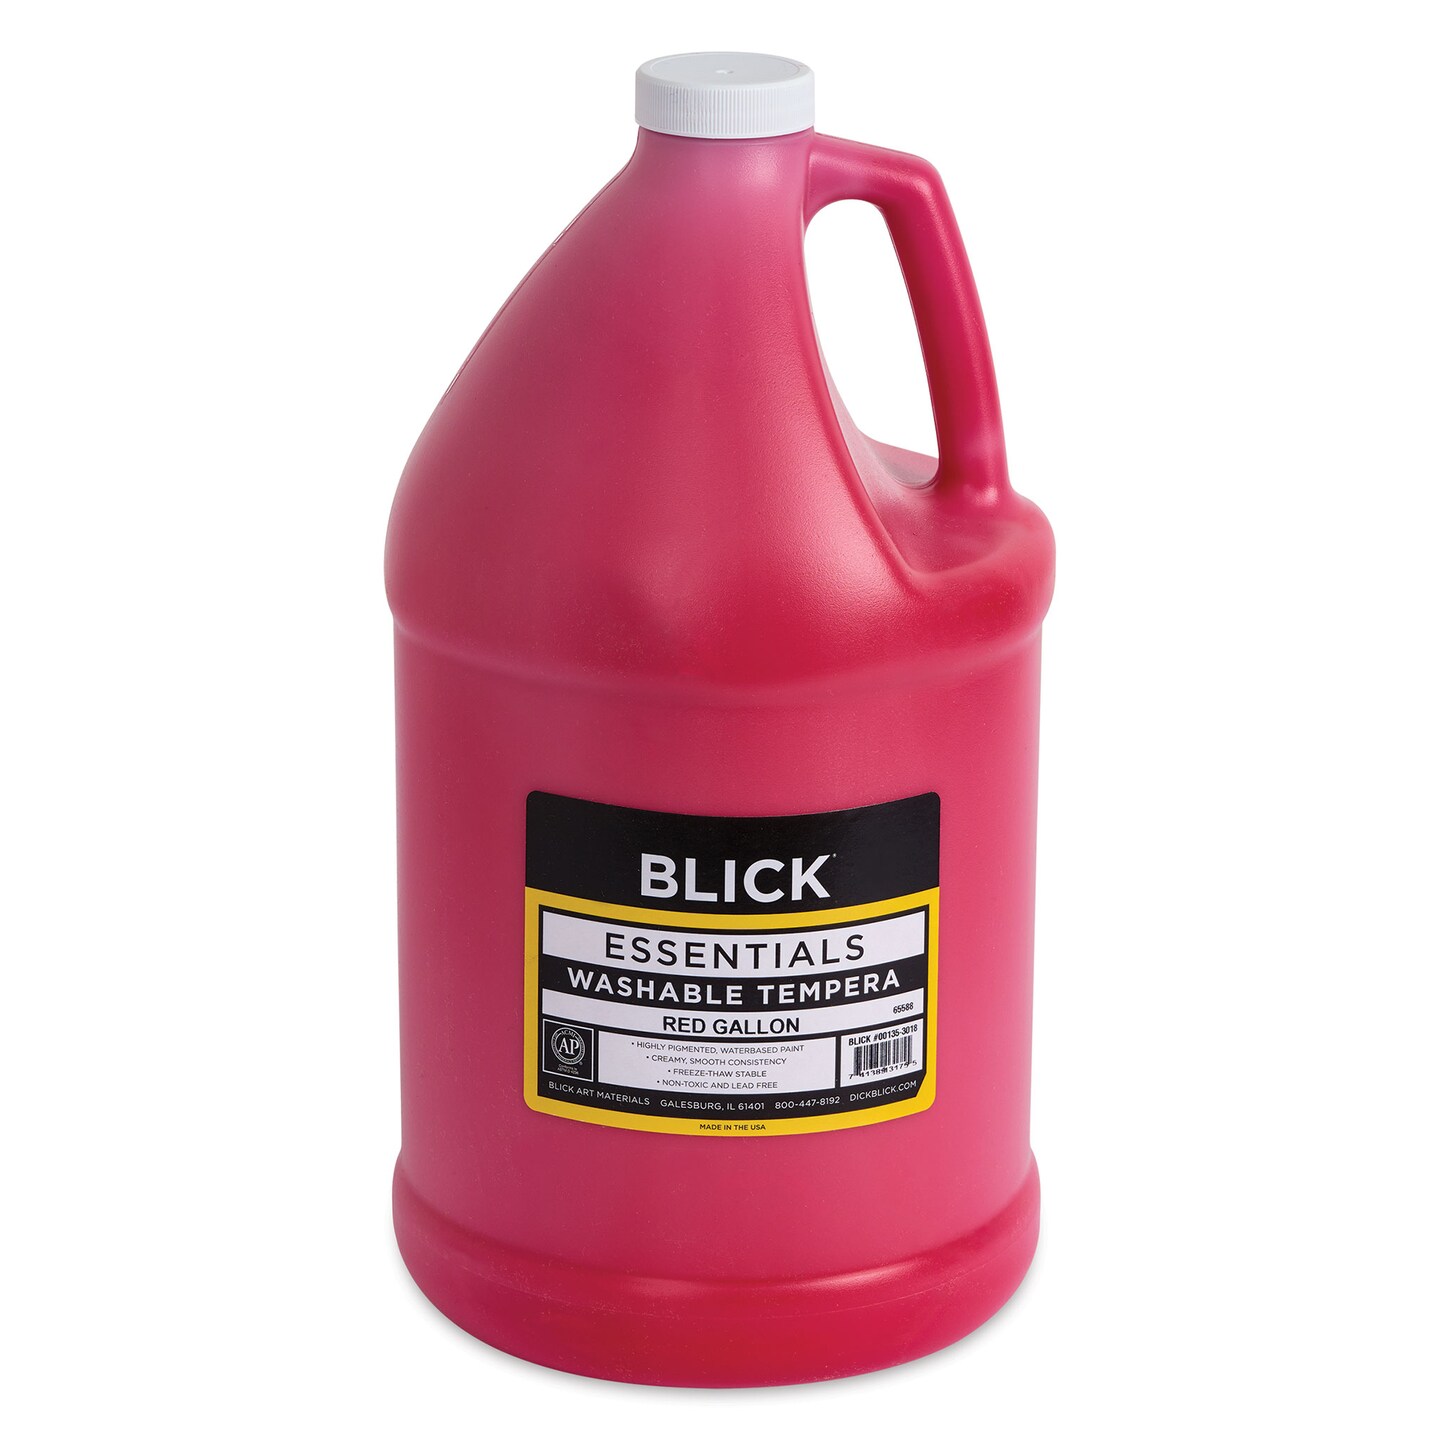 Blick Washable Tempera Paint - Red, Gallon